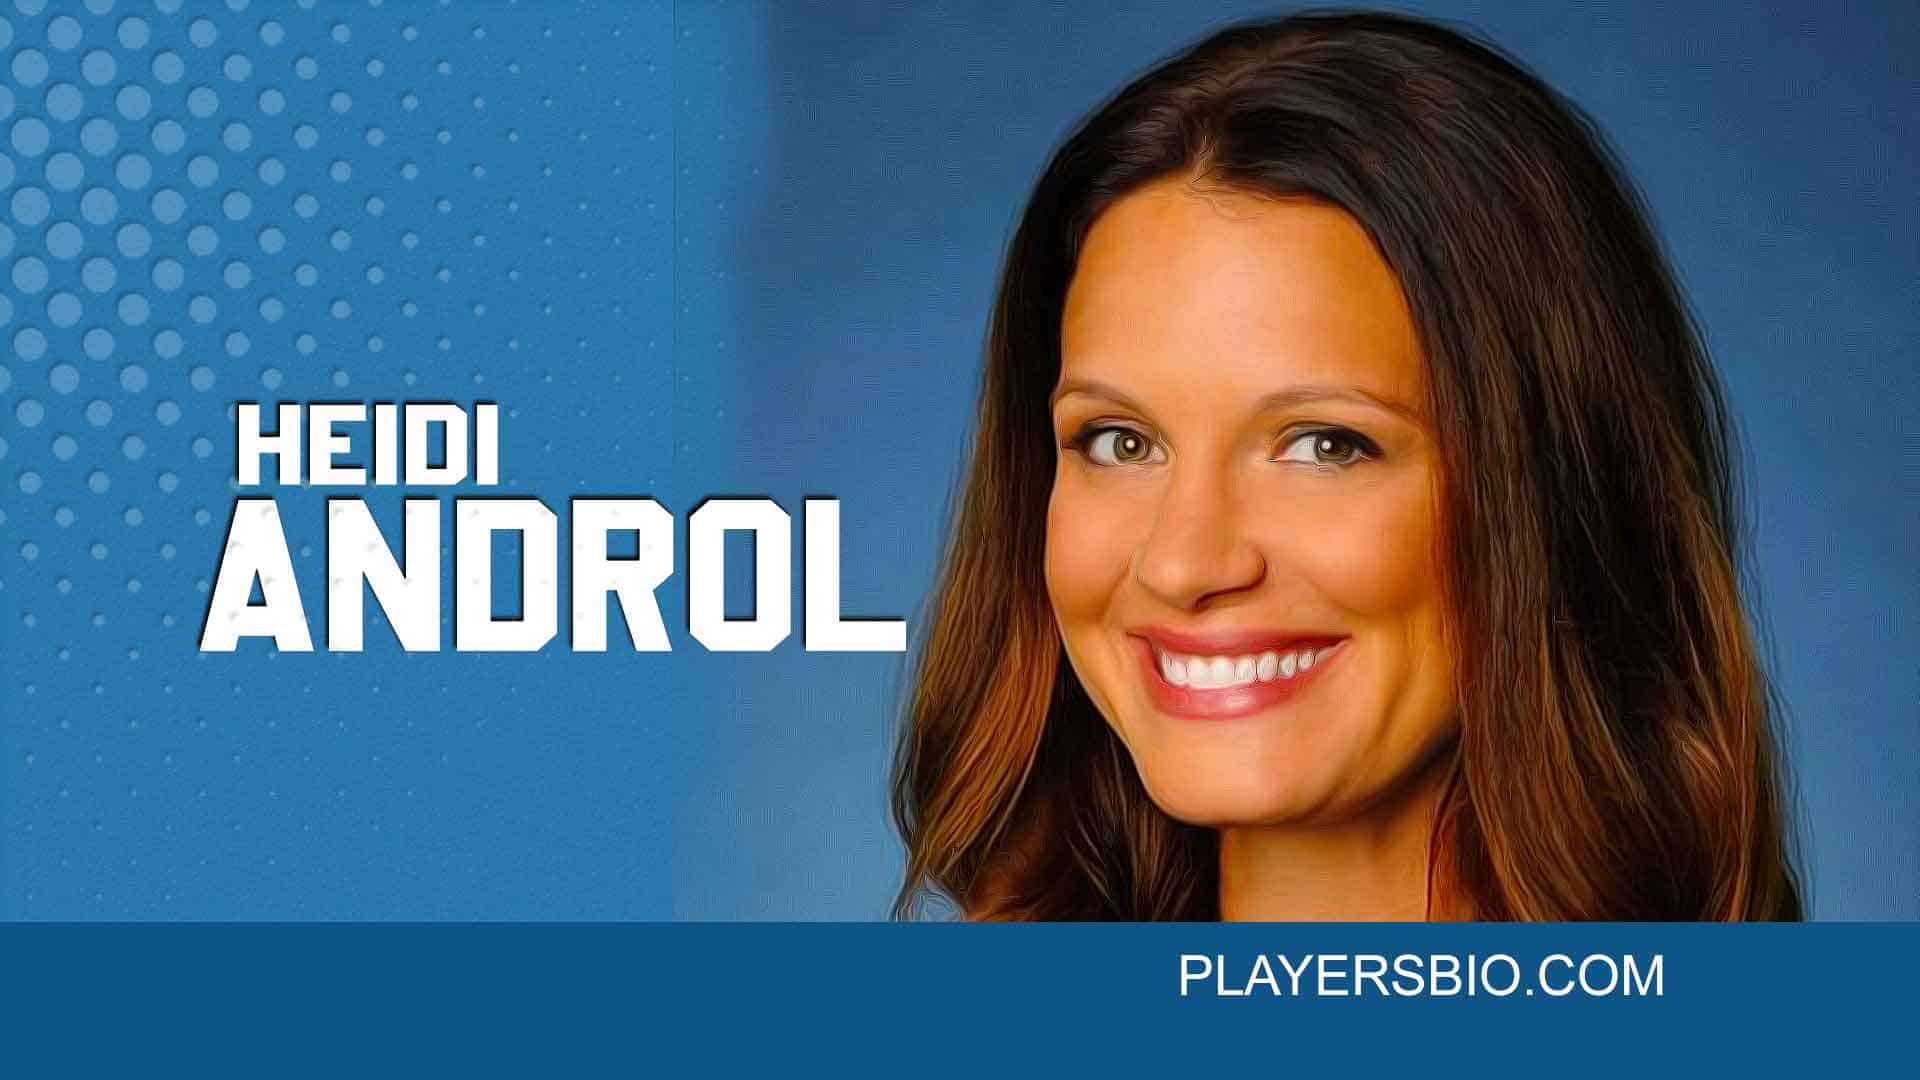 Heidi Androl is one of the well-known personalities in television journalis...